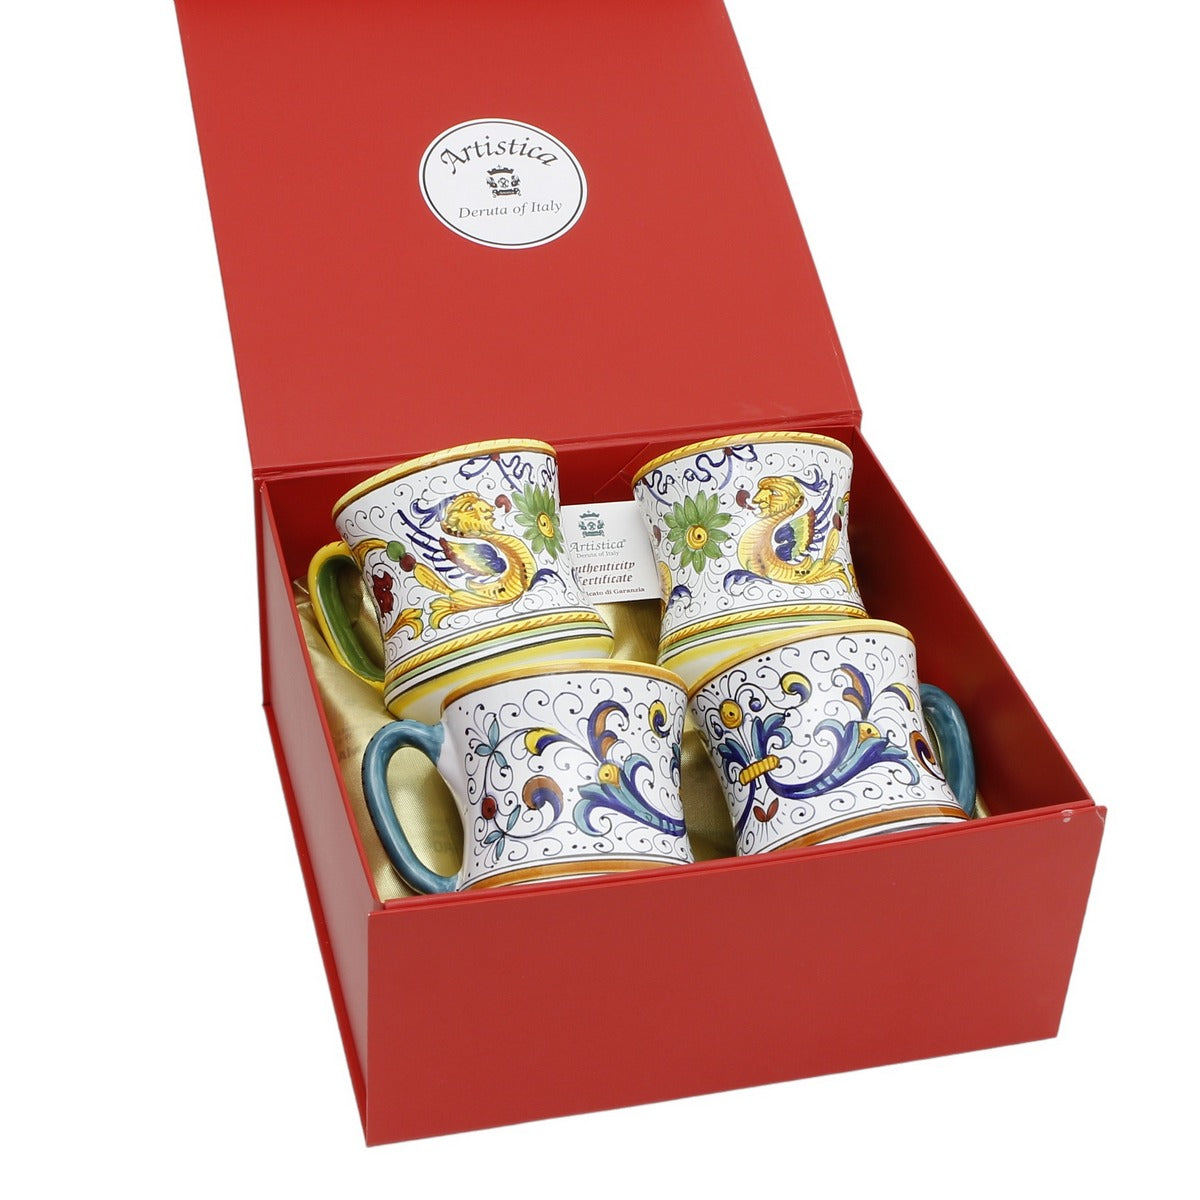 GIFT BOX: DeLuxe Glossy Red Gift Box with Ricco Deruta and Raffaellesco Concave Mugs 12 Oz. (Set of 4 pcs)